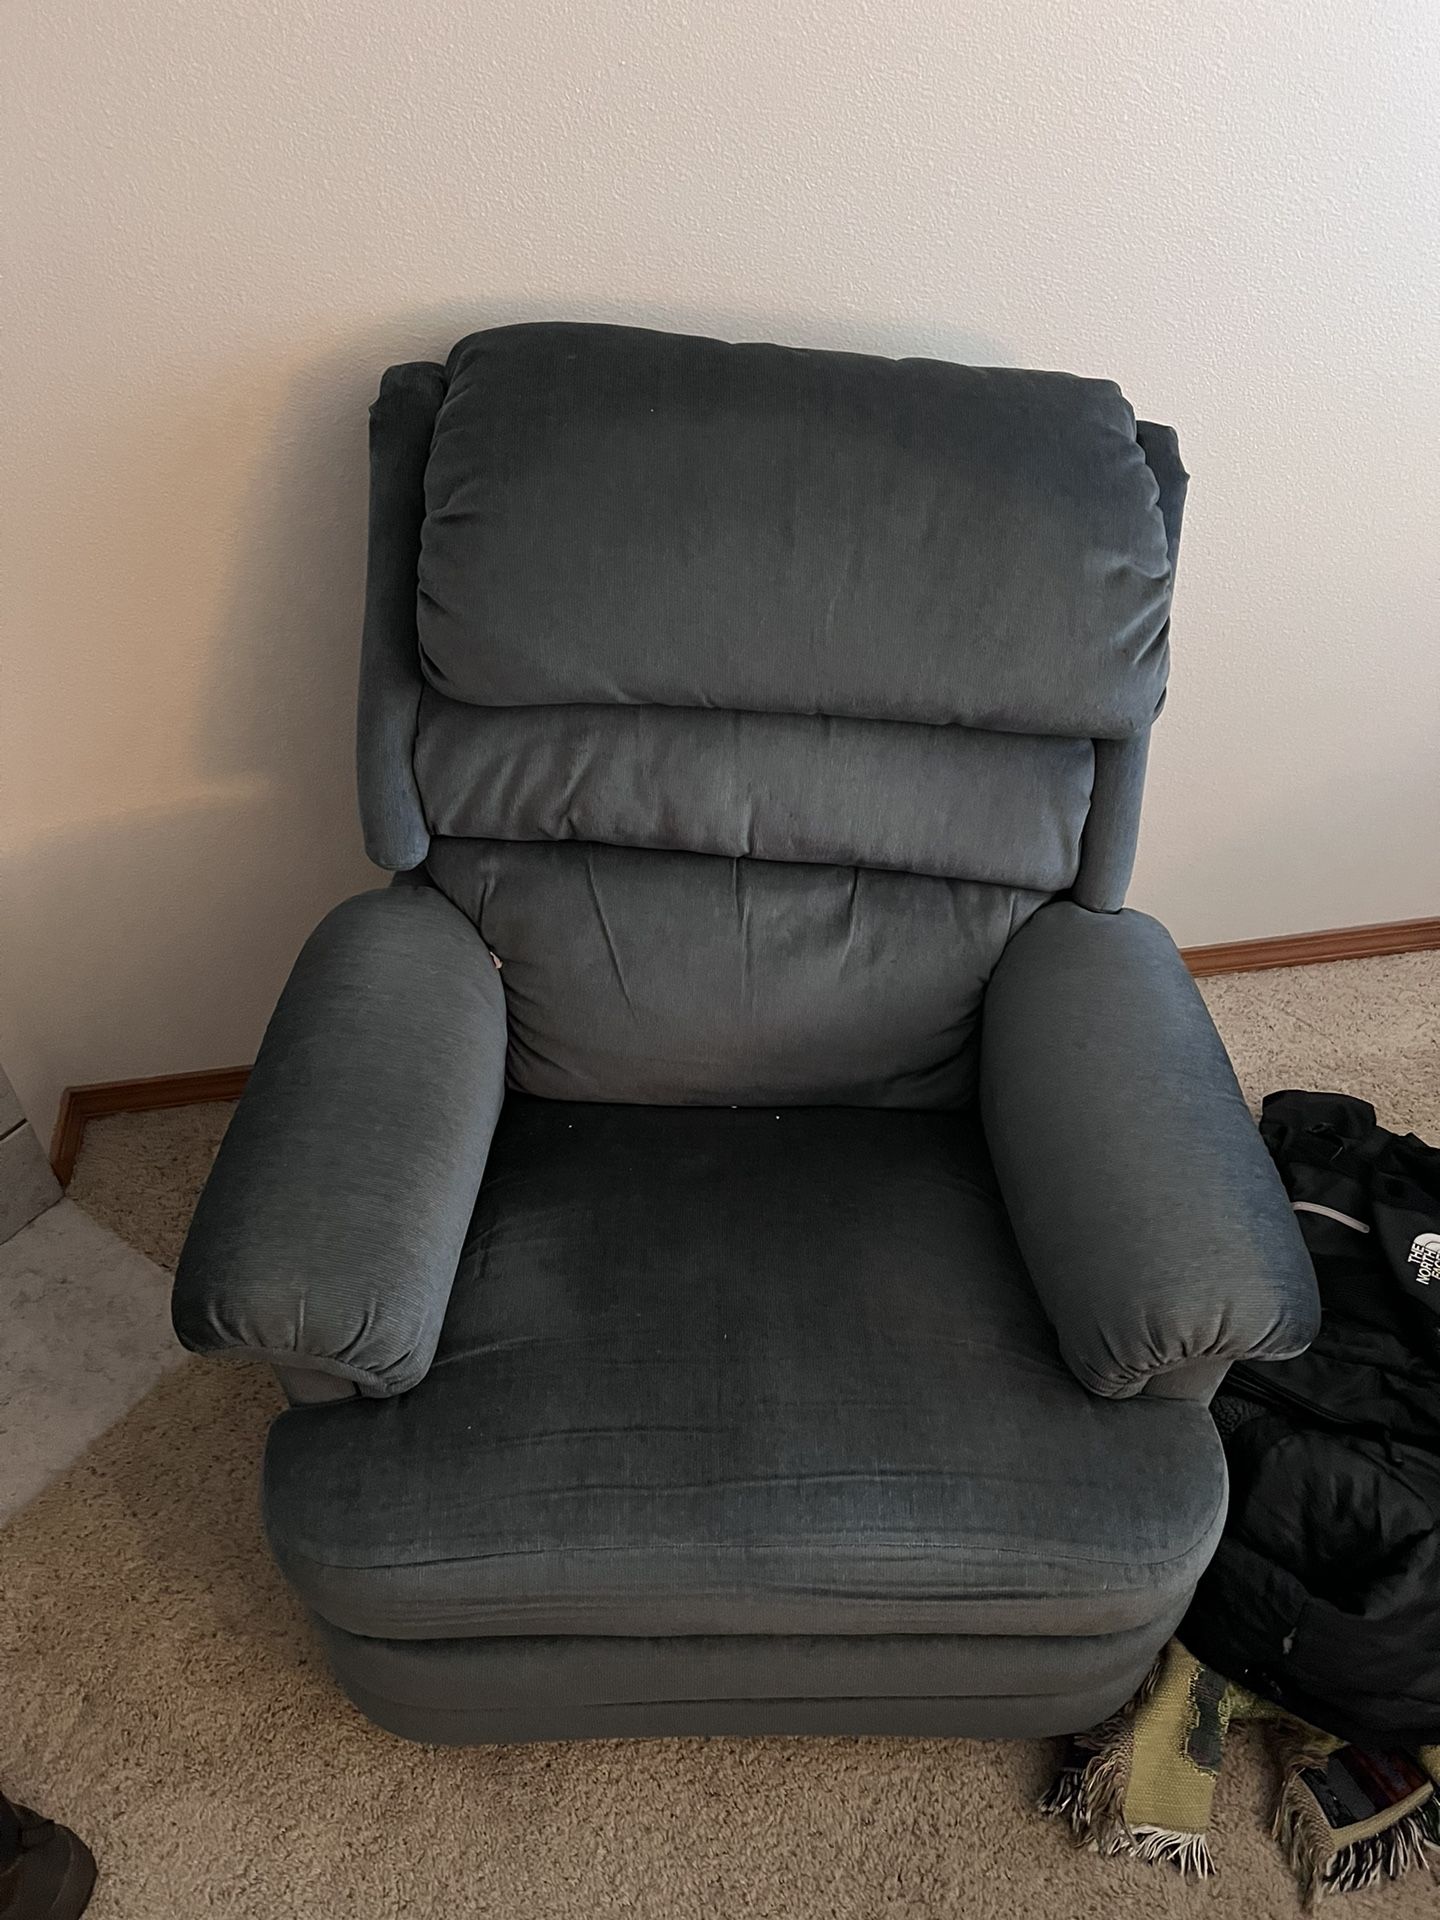 Free Blue Easy Chair Recliner